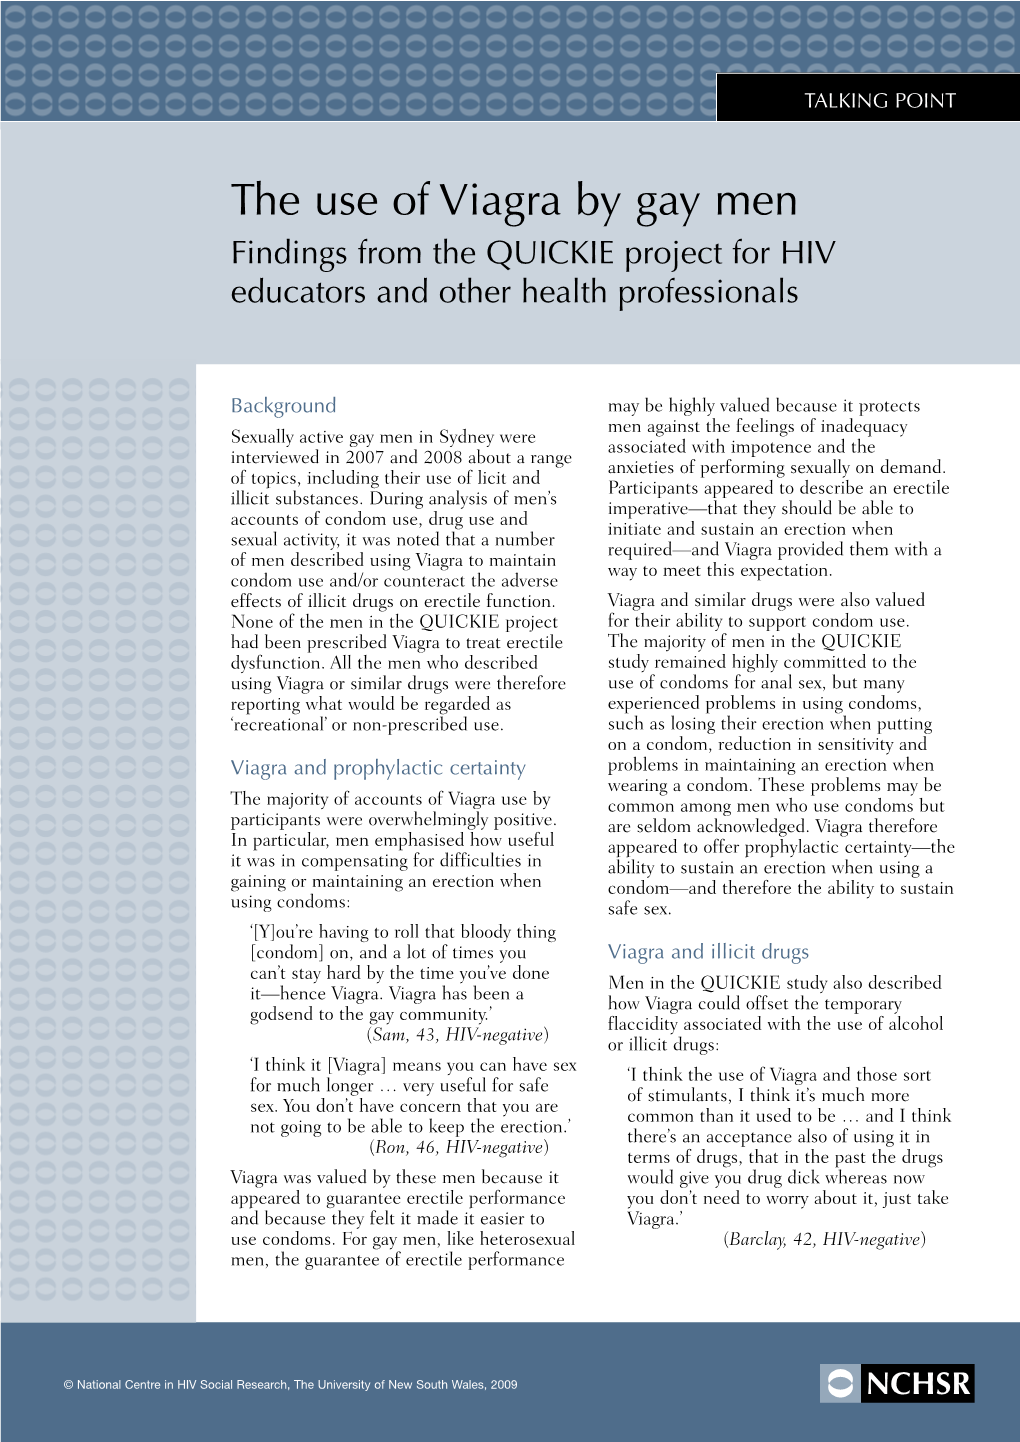 The Use of Viagra by Gay Men Findings from the QUICKIE Project for HIV Educators and Other Health Professionals